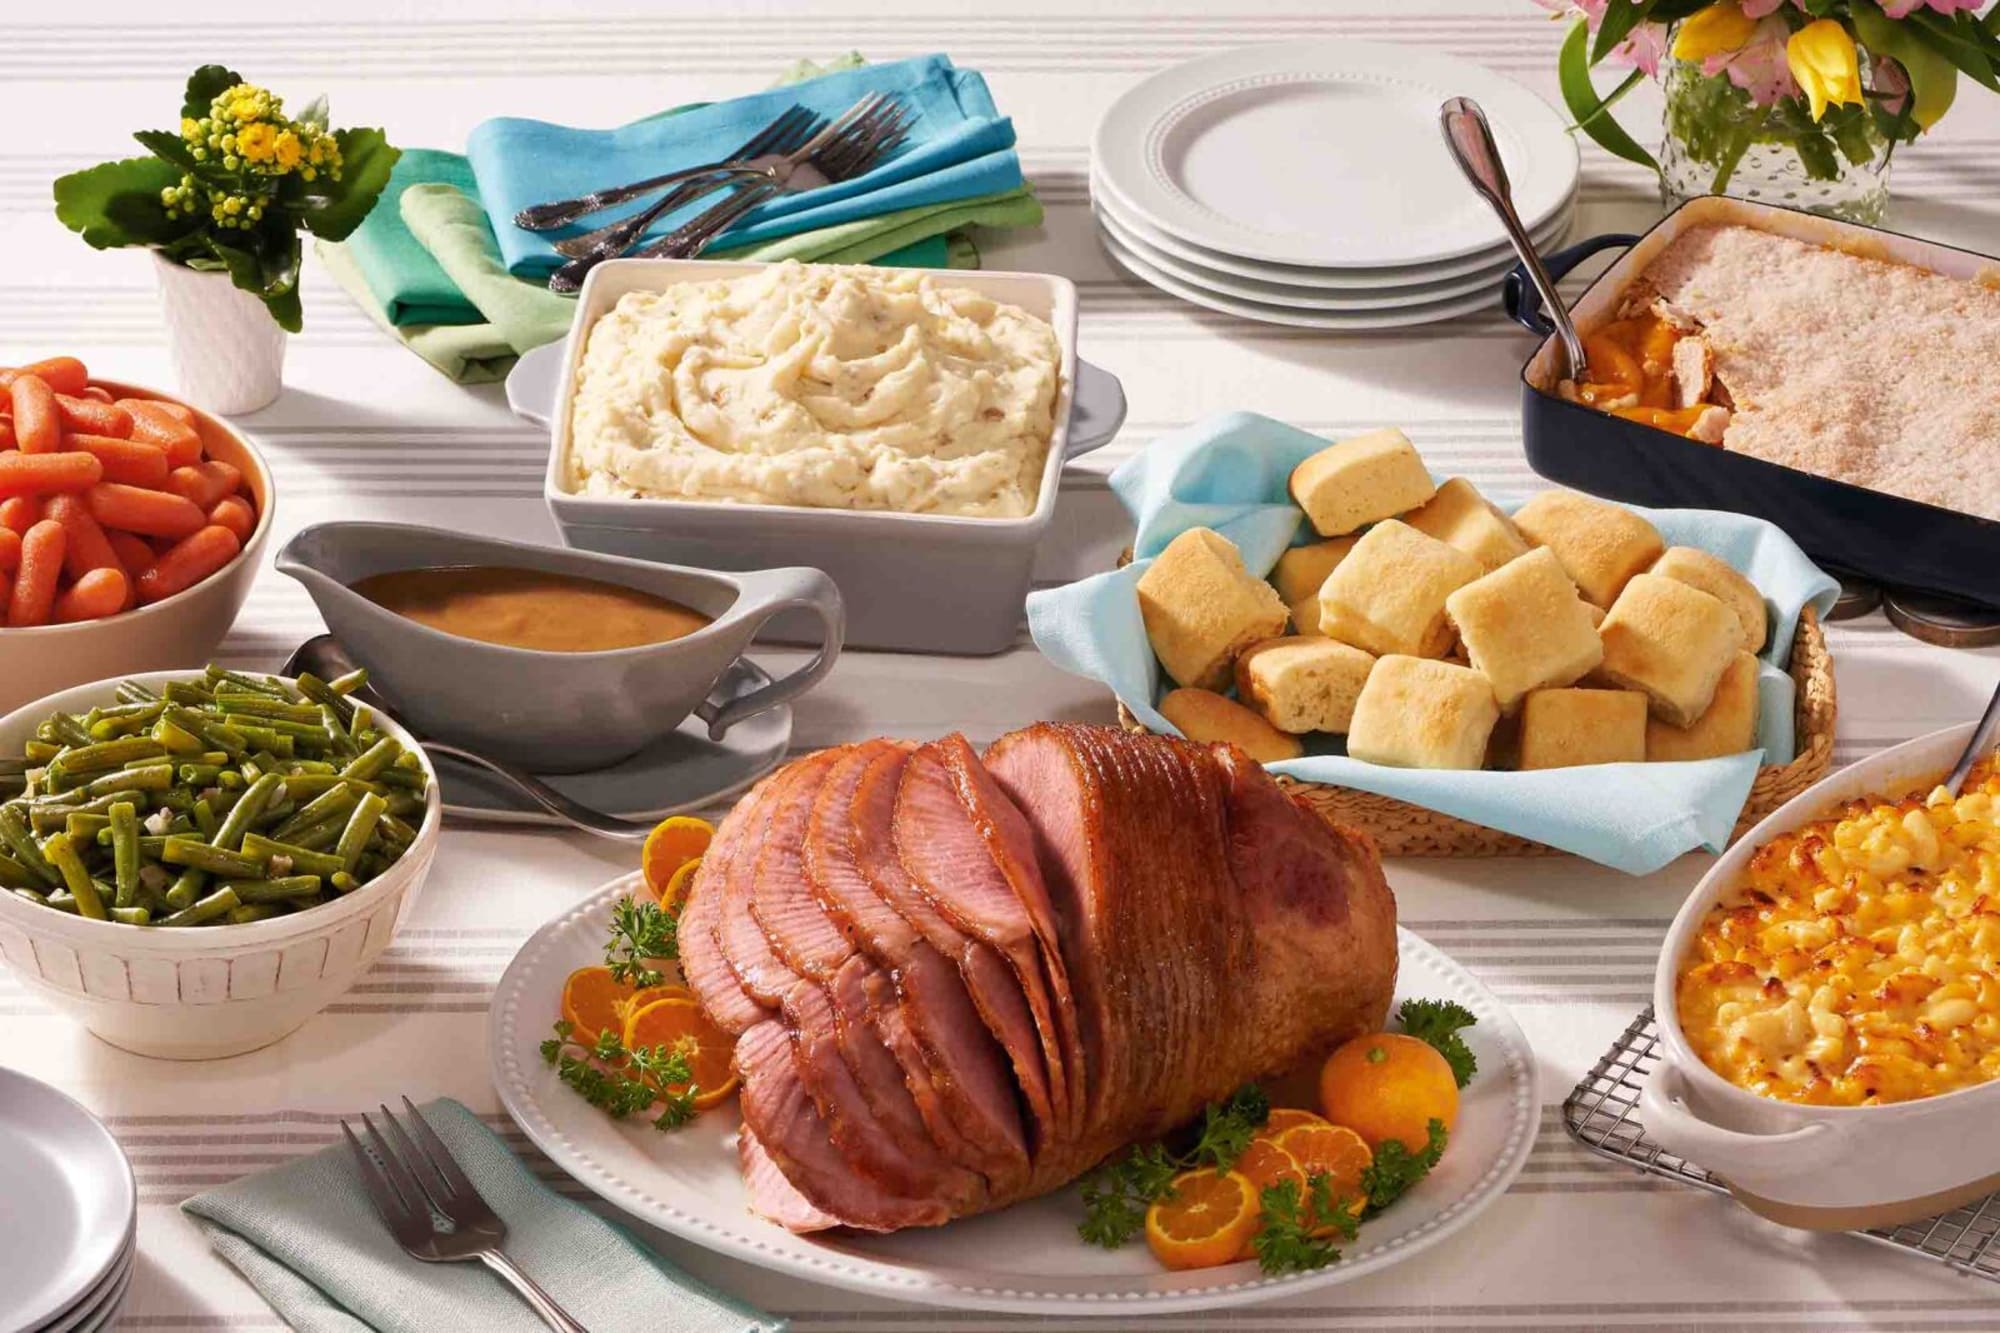 Cracker Barrel is bringing the feasts for Easter - Guilty Eats